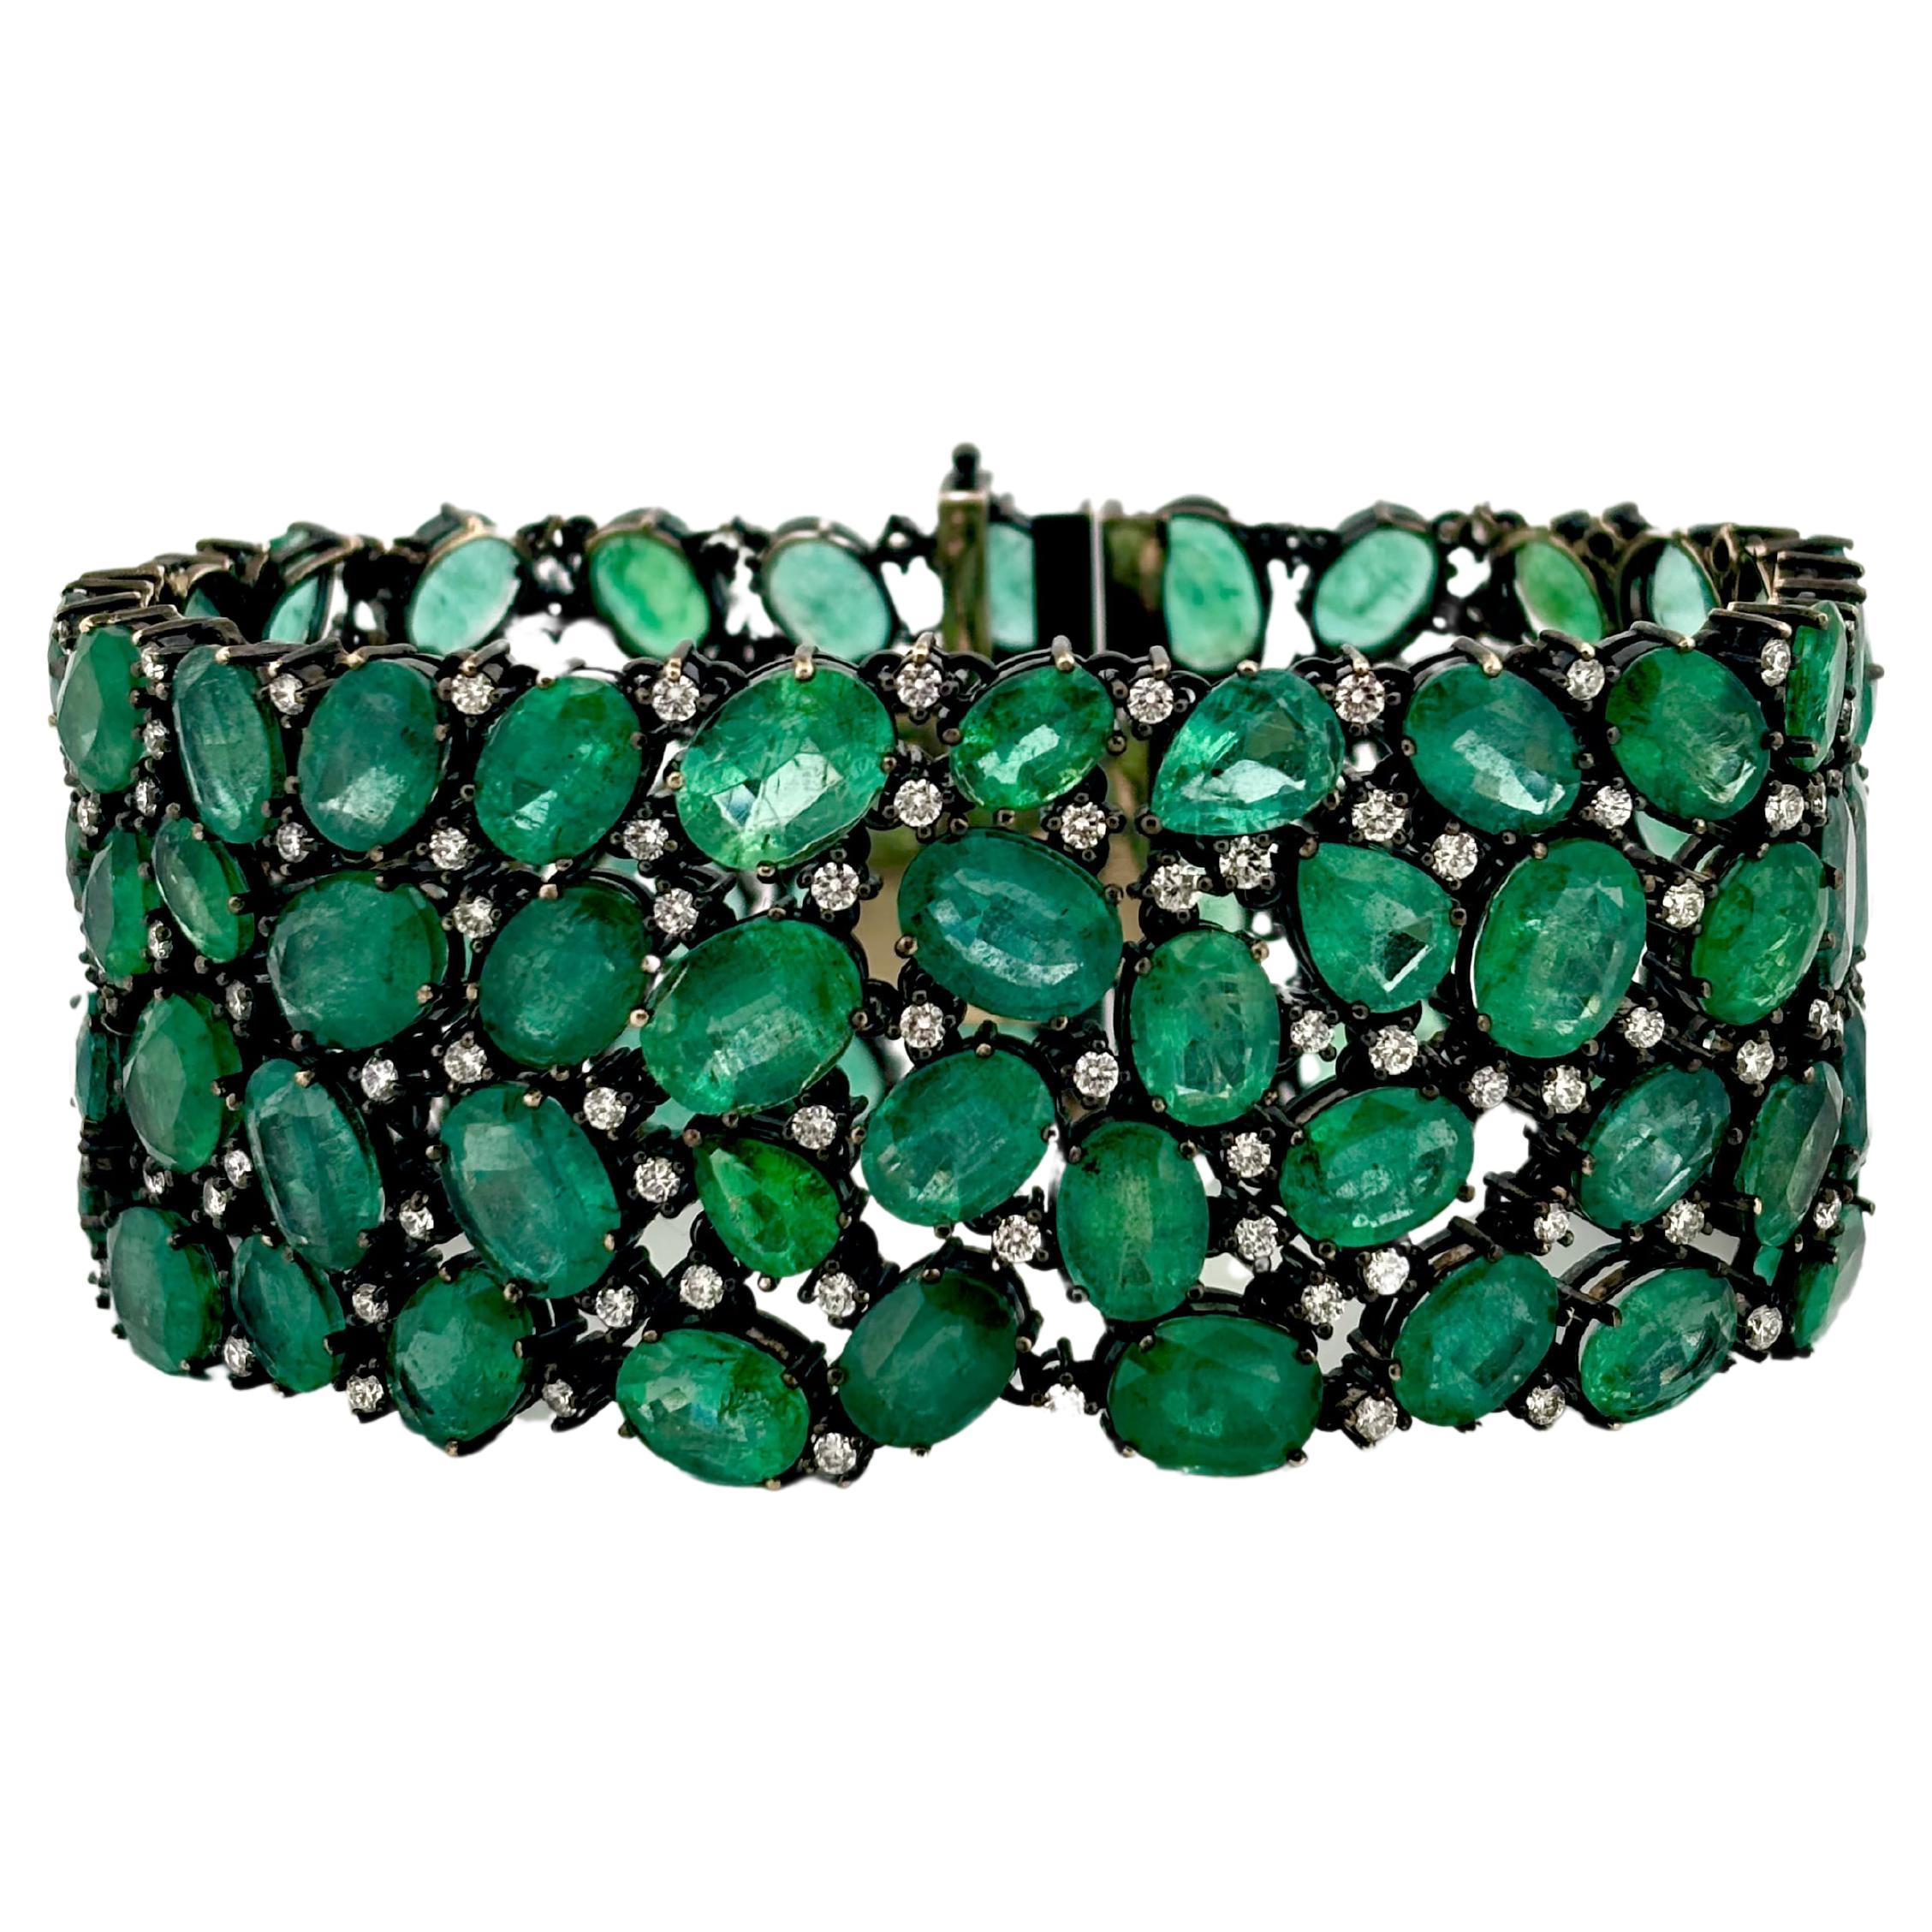 115.21 Ct Zambian Emerald studded Contemporary Statement Bracelet in 18K Gold